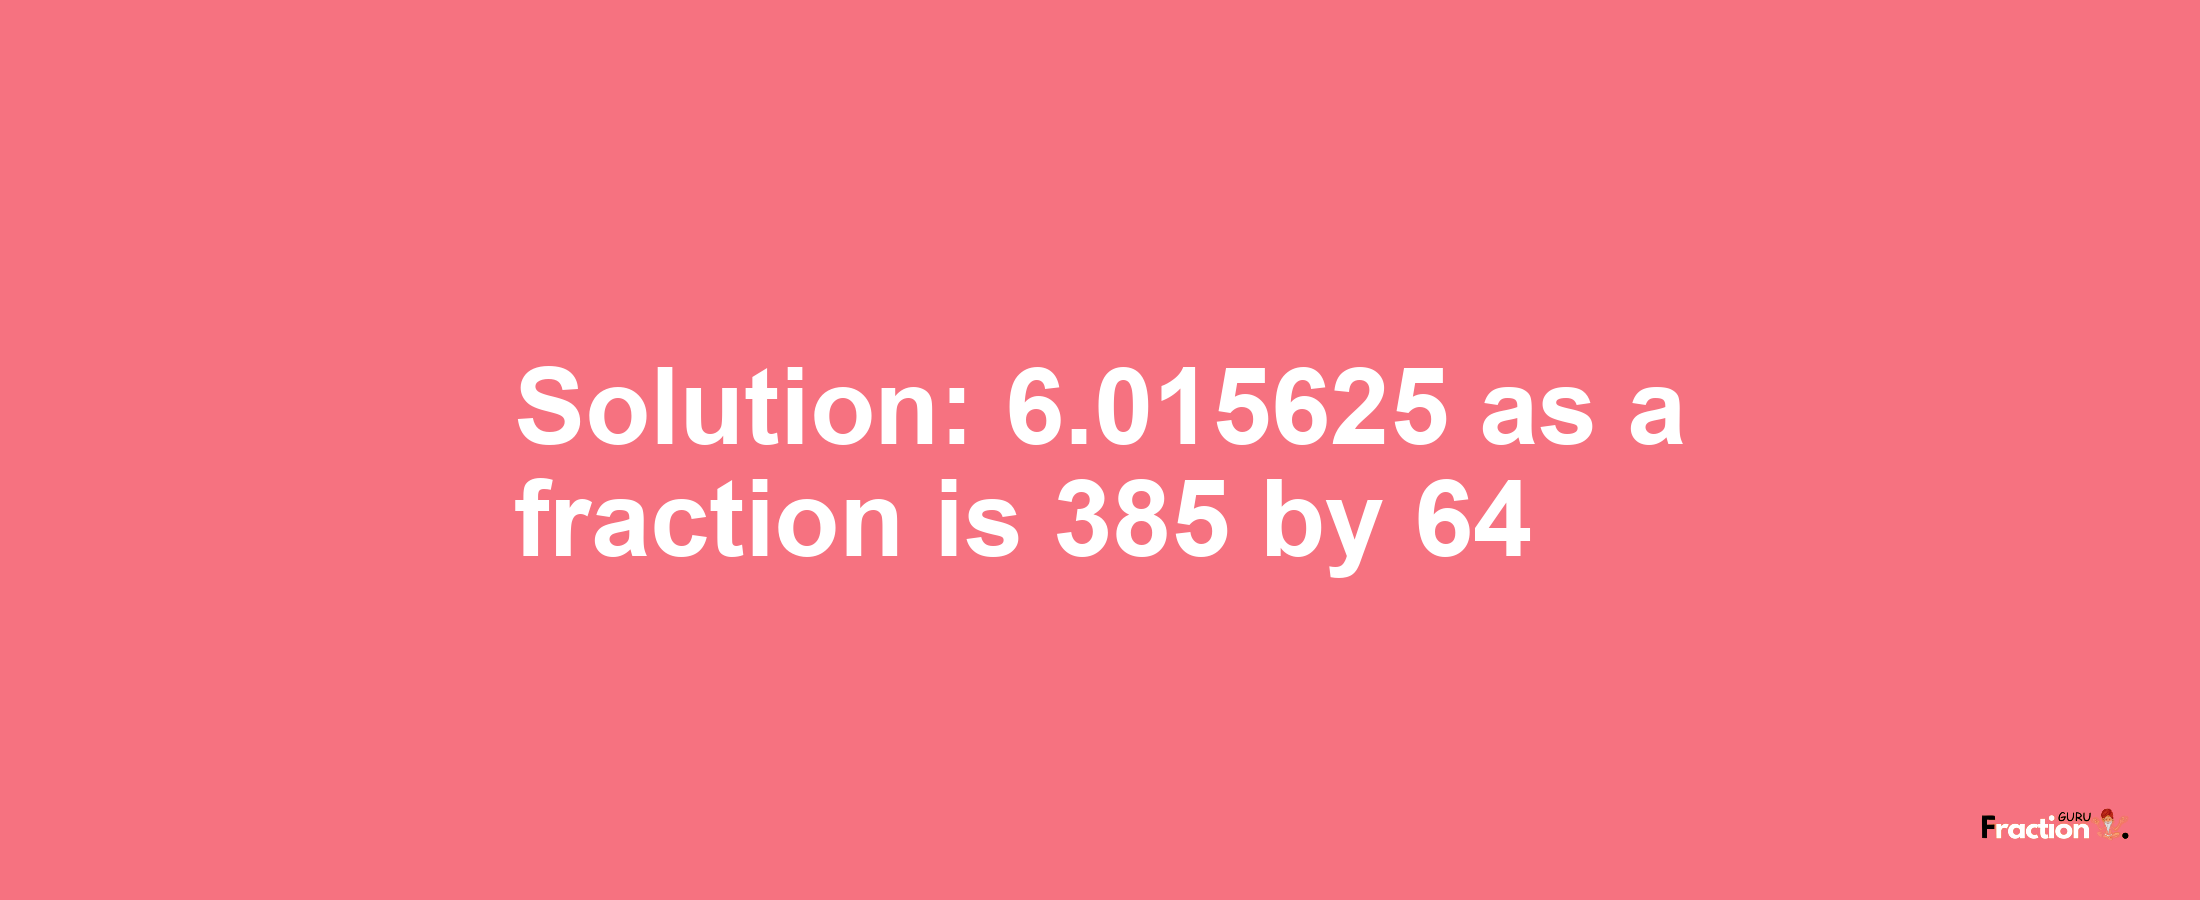 Solution:6.015625 as a fraction is 385/64